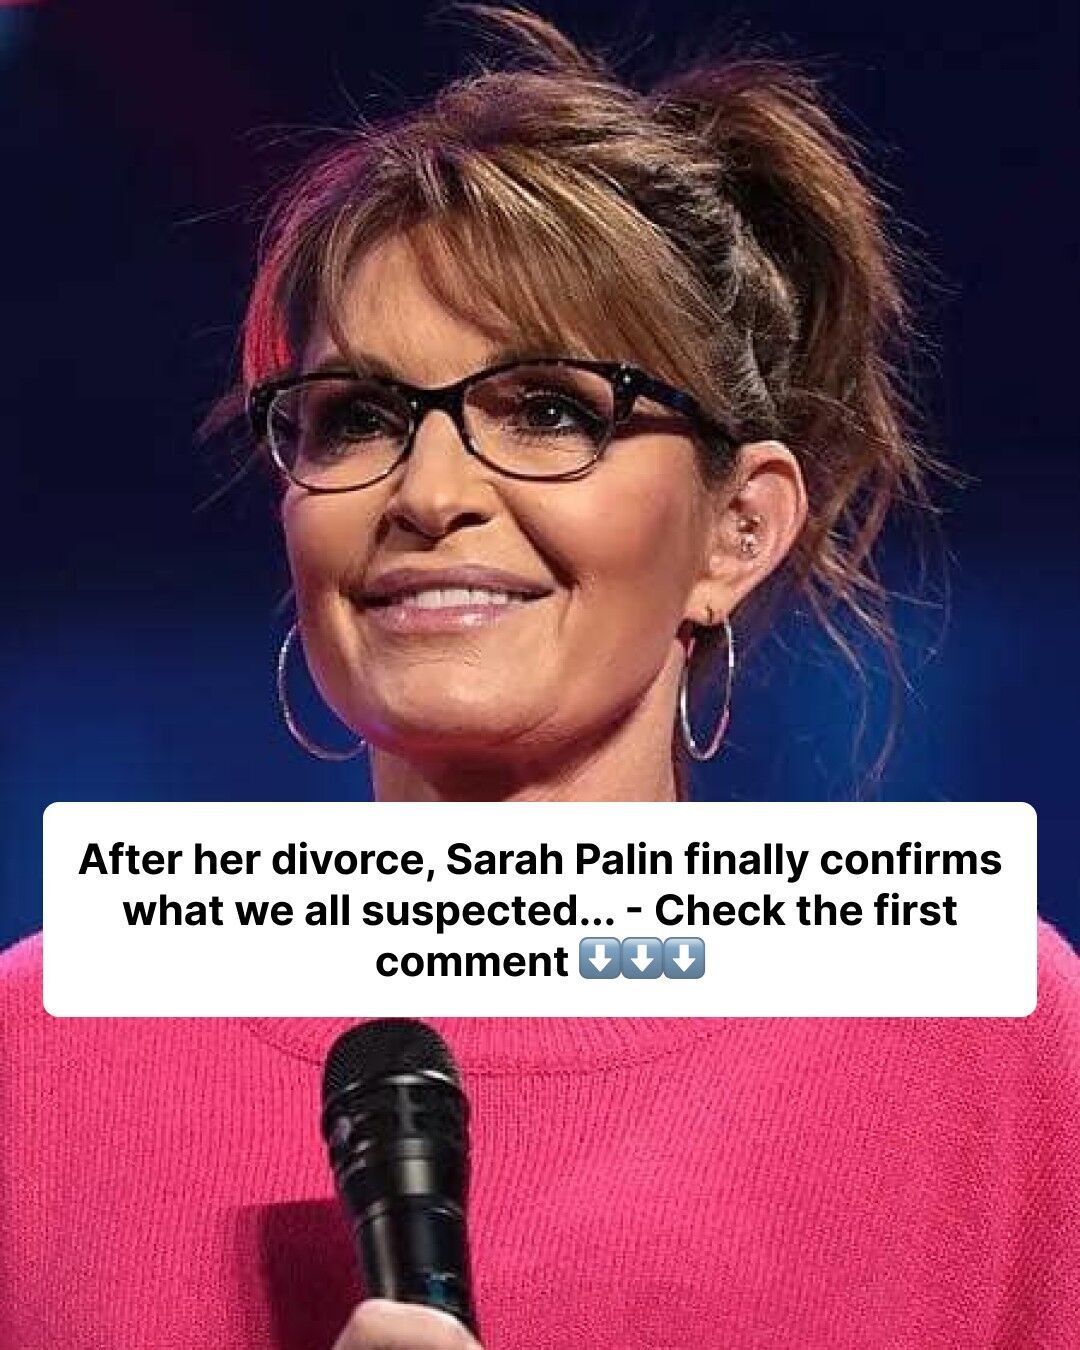 Sarah Palin’s Journey: A Life of Politics, Love, and Resilience ...